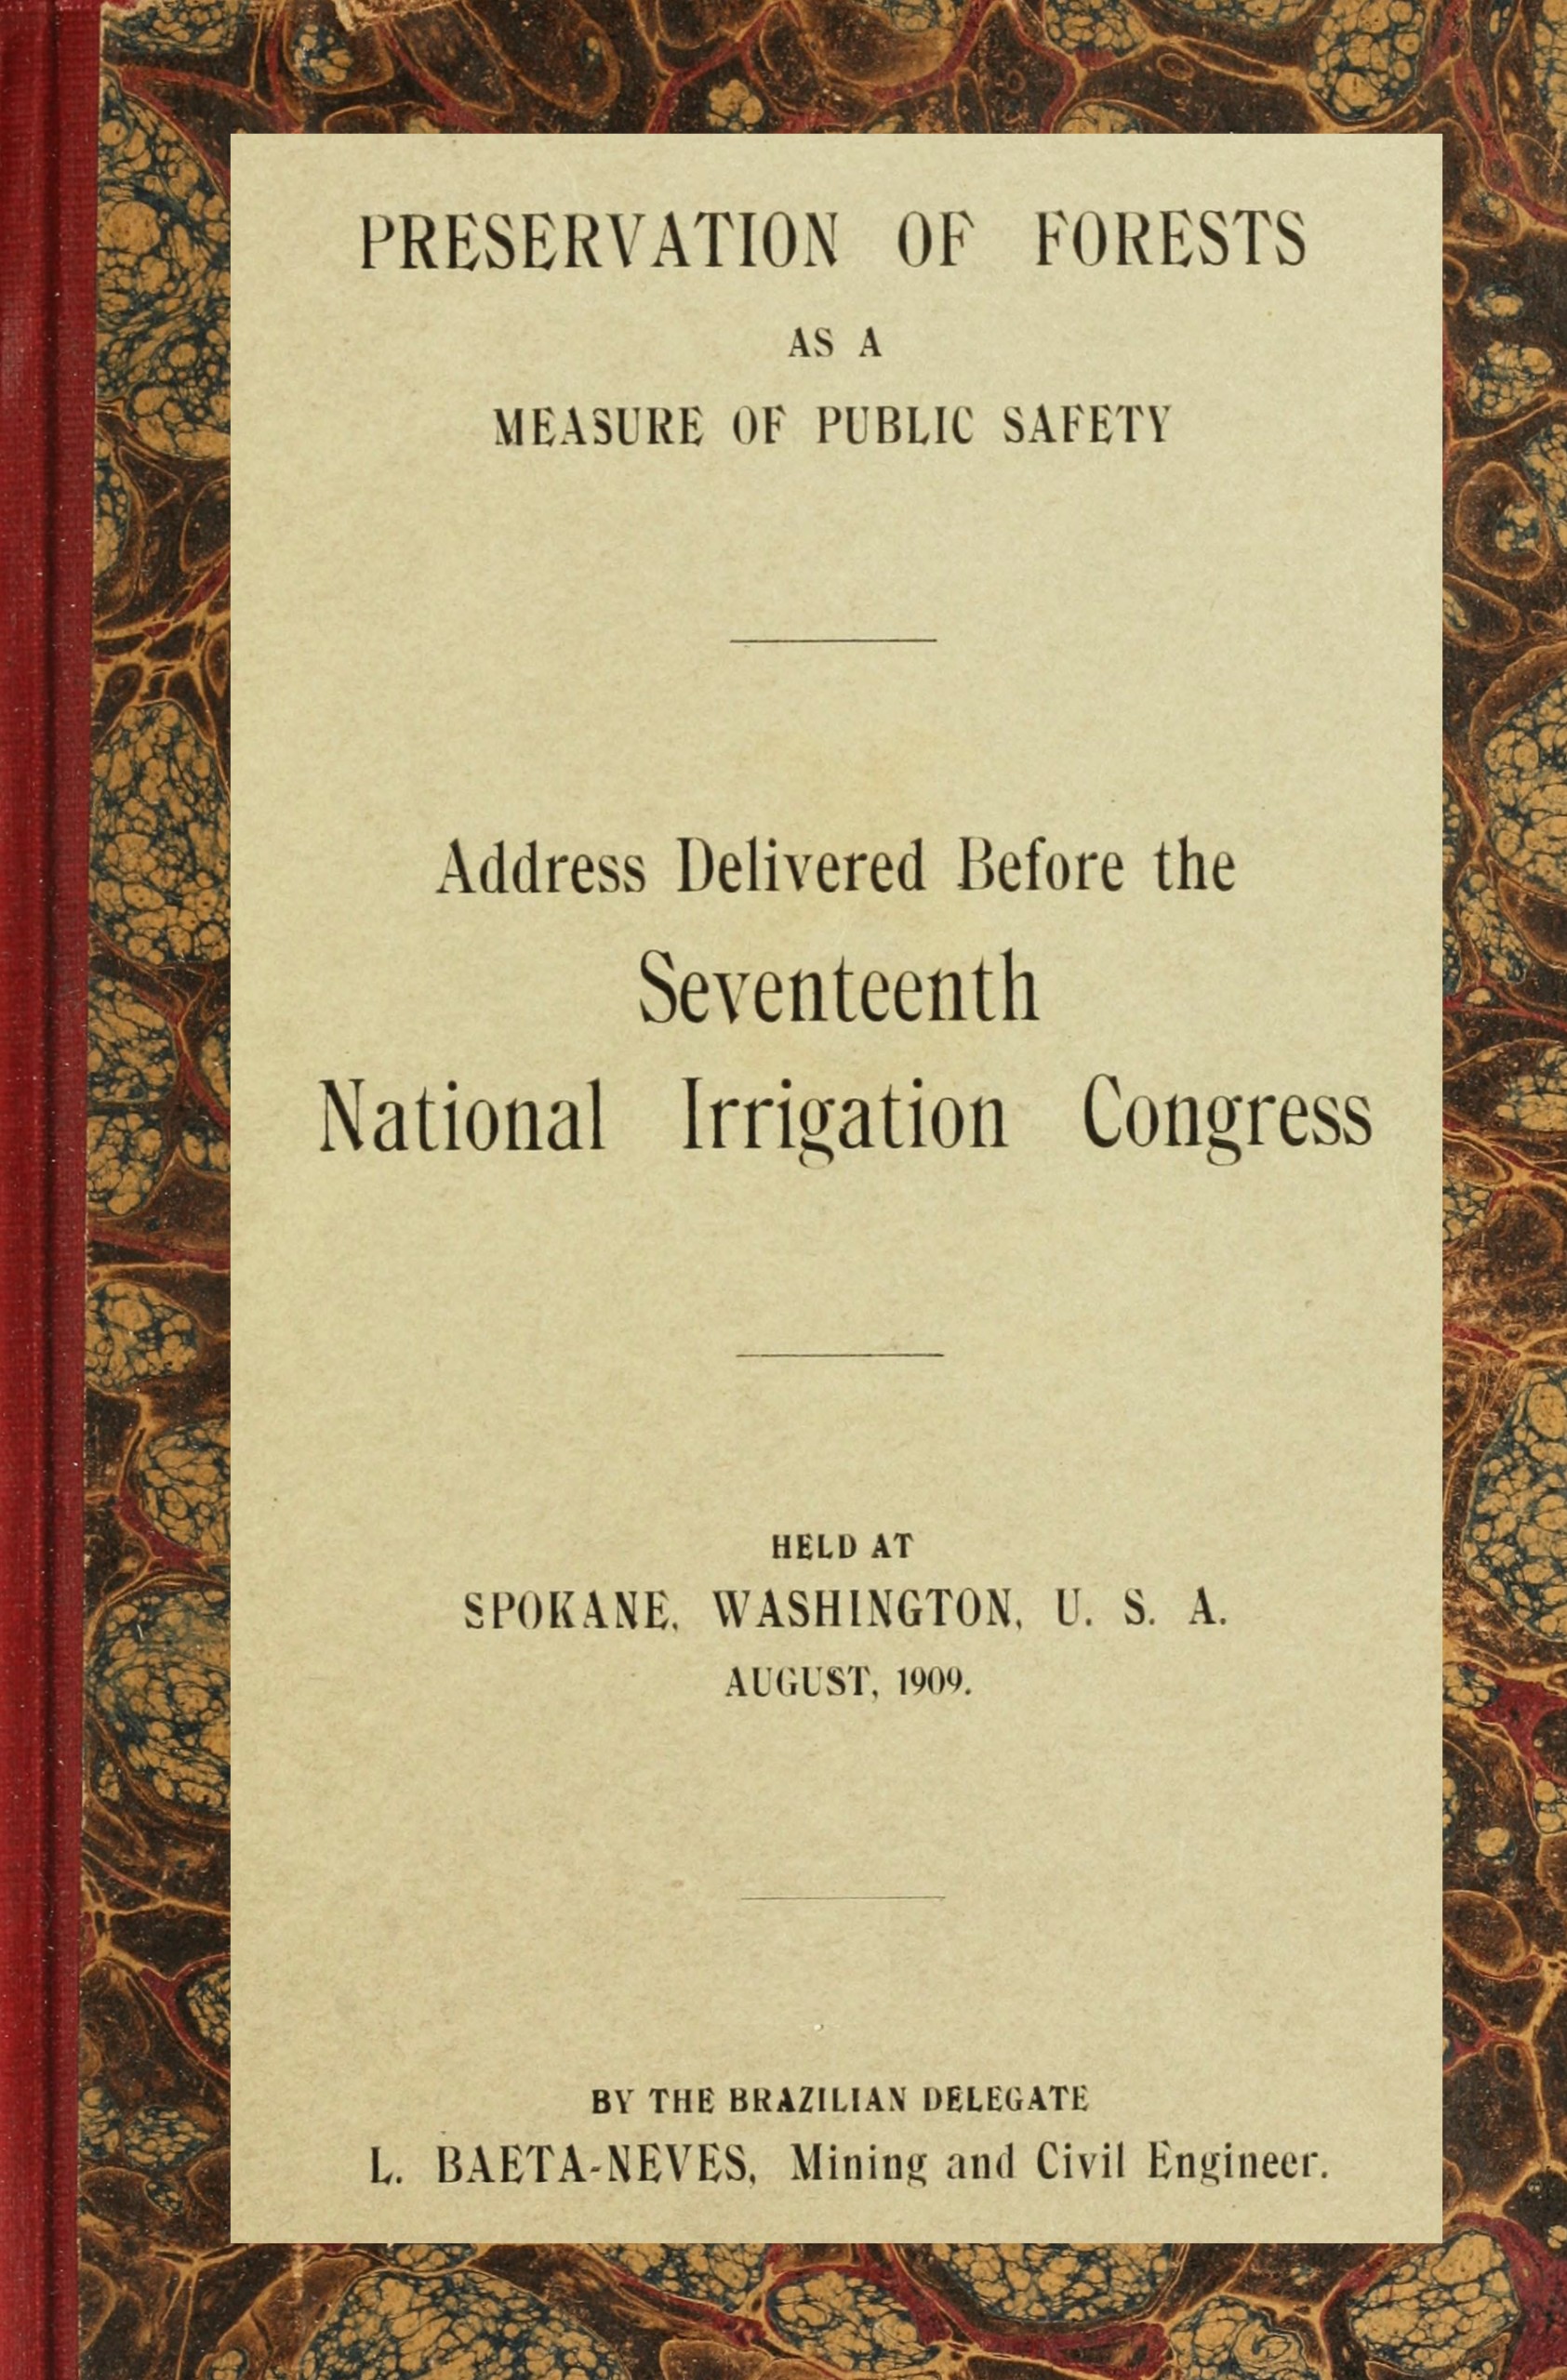 Preservation of forests as a measure of public safety&#10;Address before the 17th National Irrigation Congress, Spokane, Wash., August, 1909